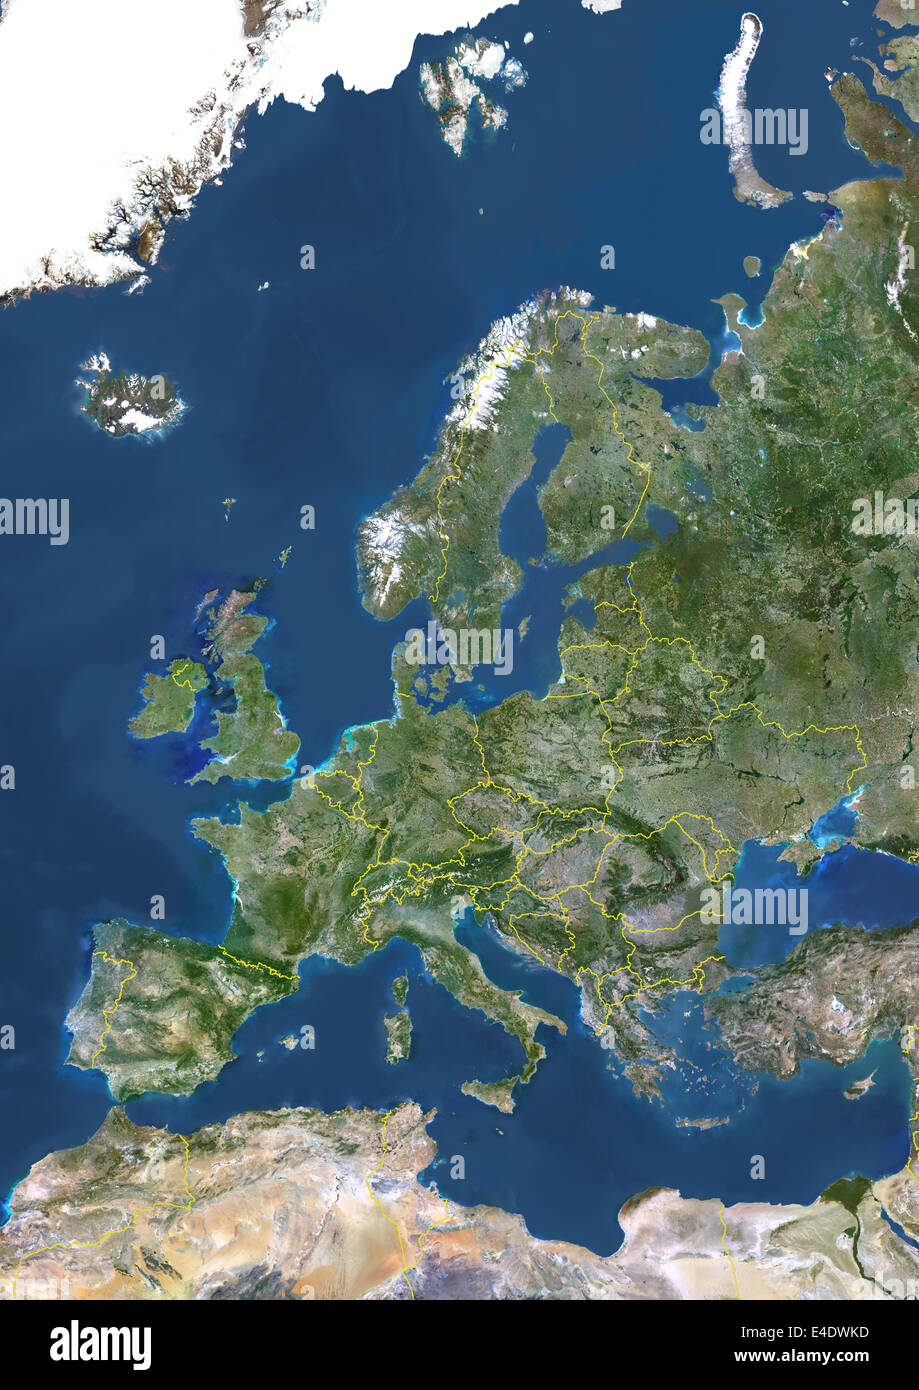 Europe With Country Borders, True Colour Satellite Image. True colour satellite image of Europe with country borders. This image Stock Photo